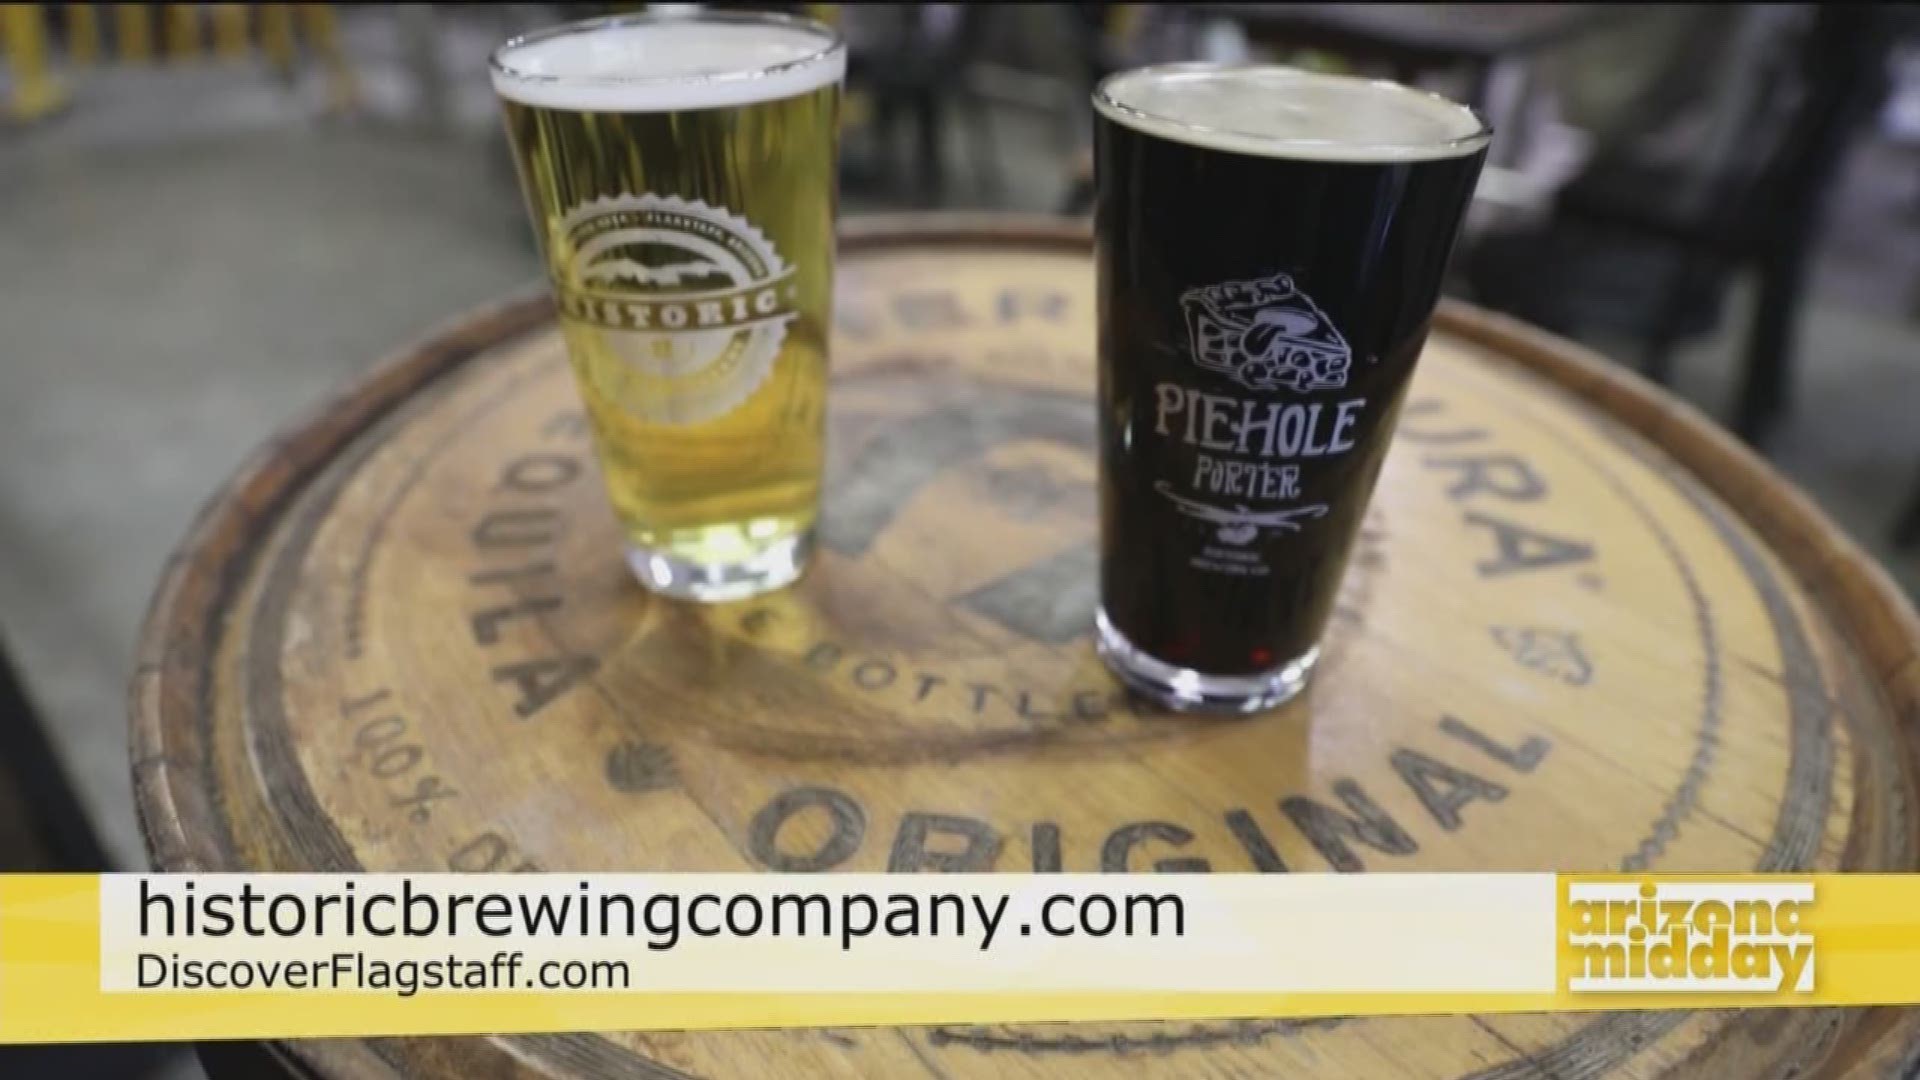 Austin Corbett from Historic Brewing Company in Flagstaff gives us a tour of the brewery and tap room